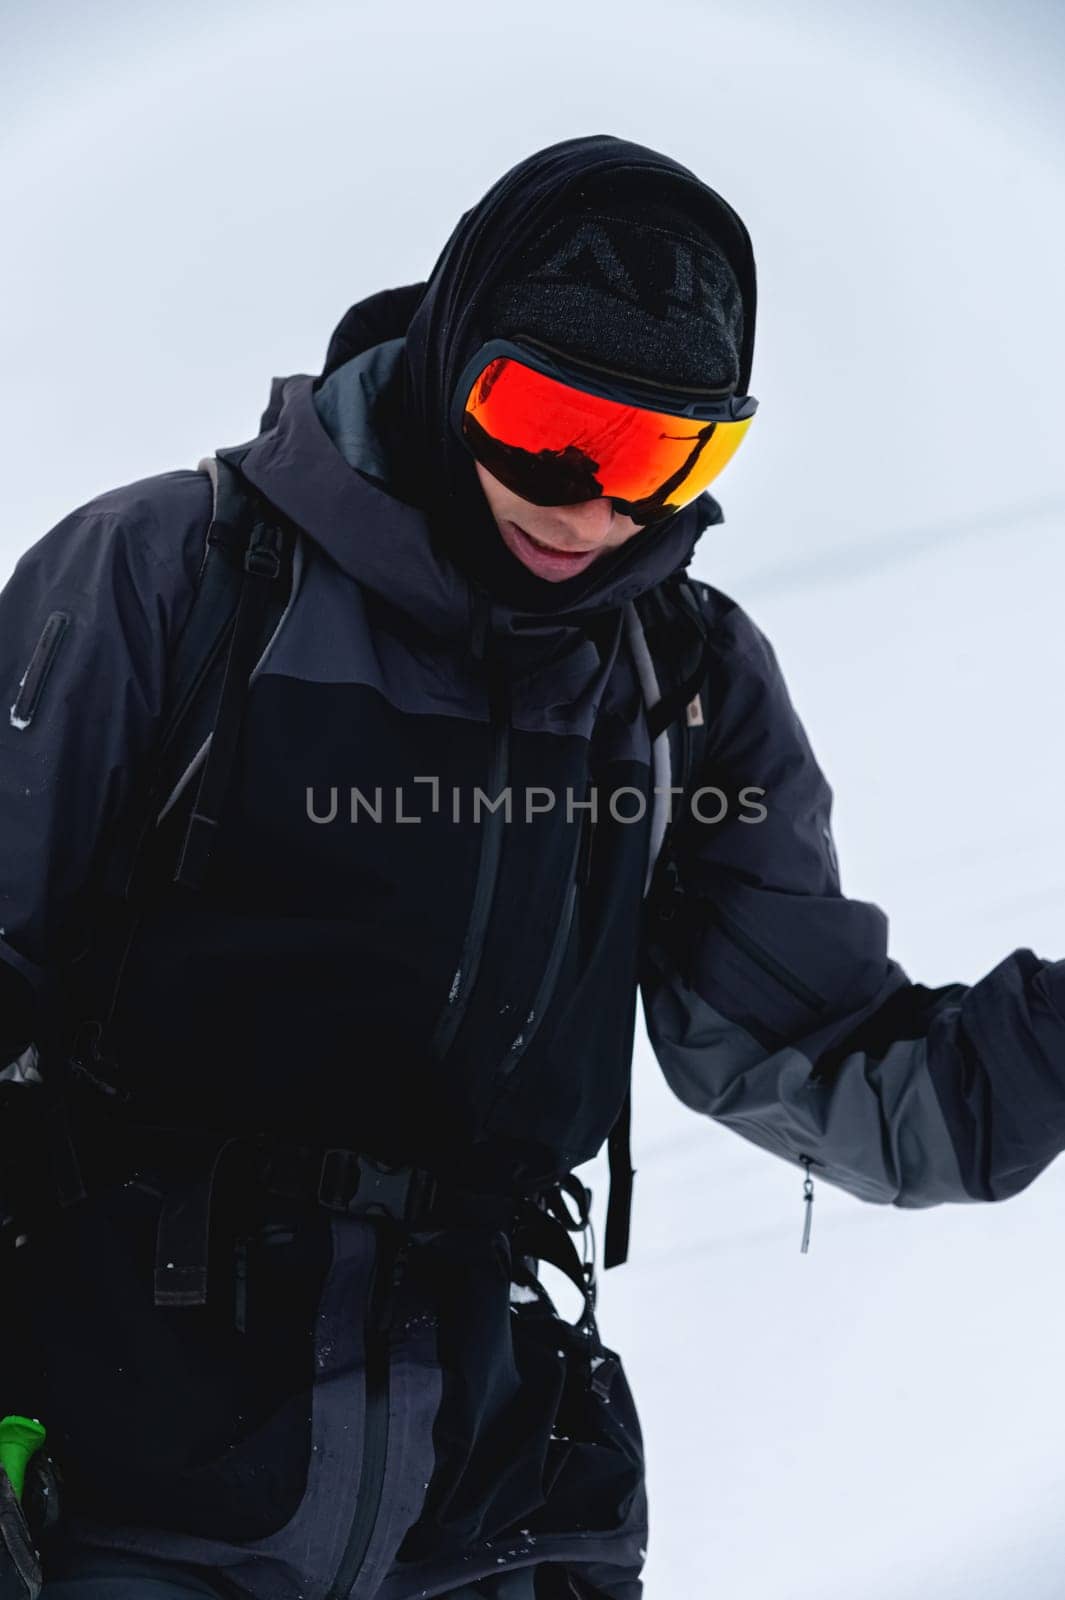 Portrait of a skier in safe ski equipment, standing and relaxing smiling while on vacation on the ski slope.